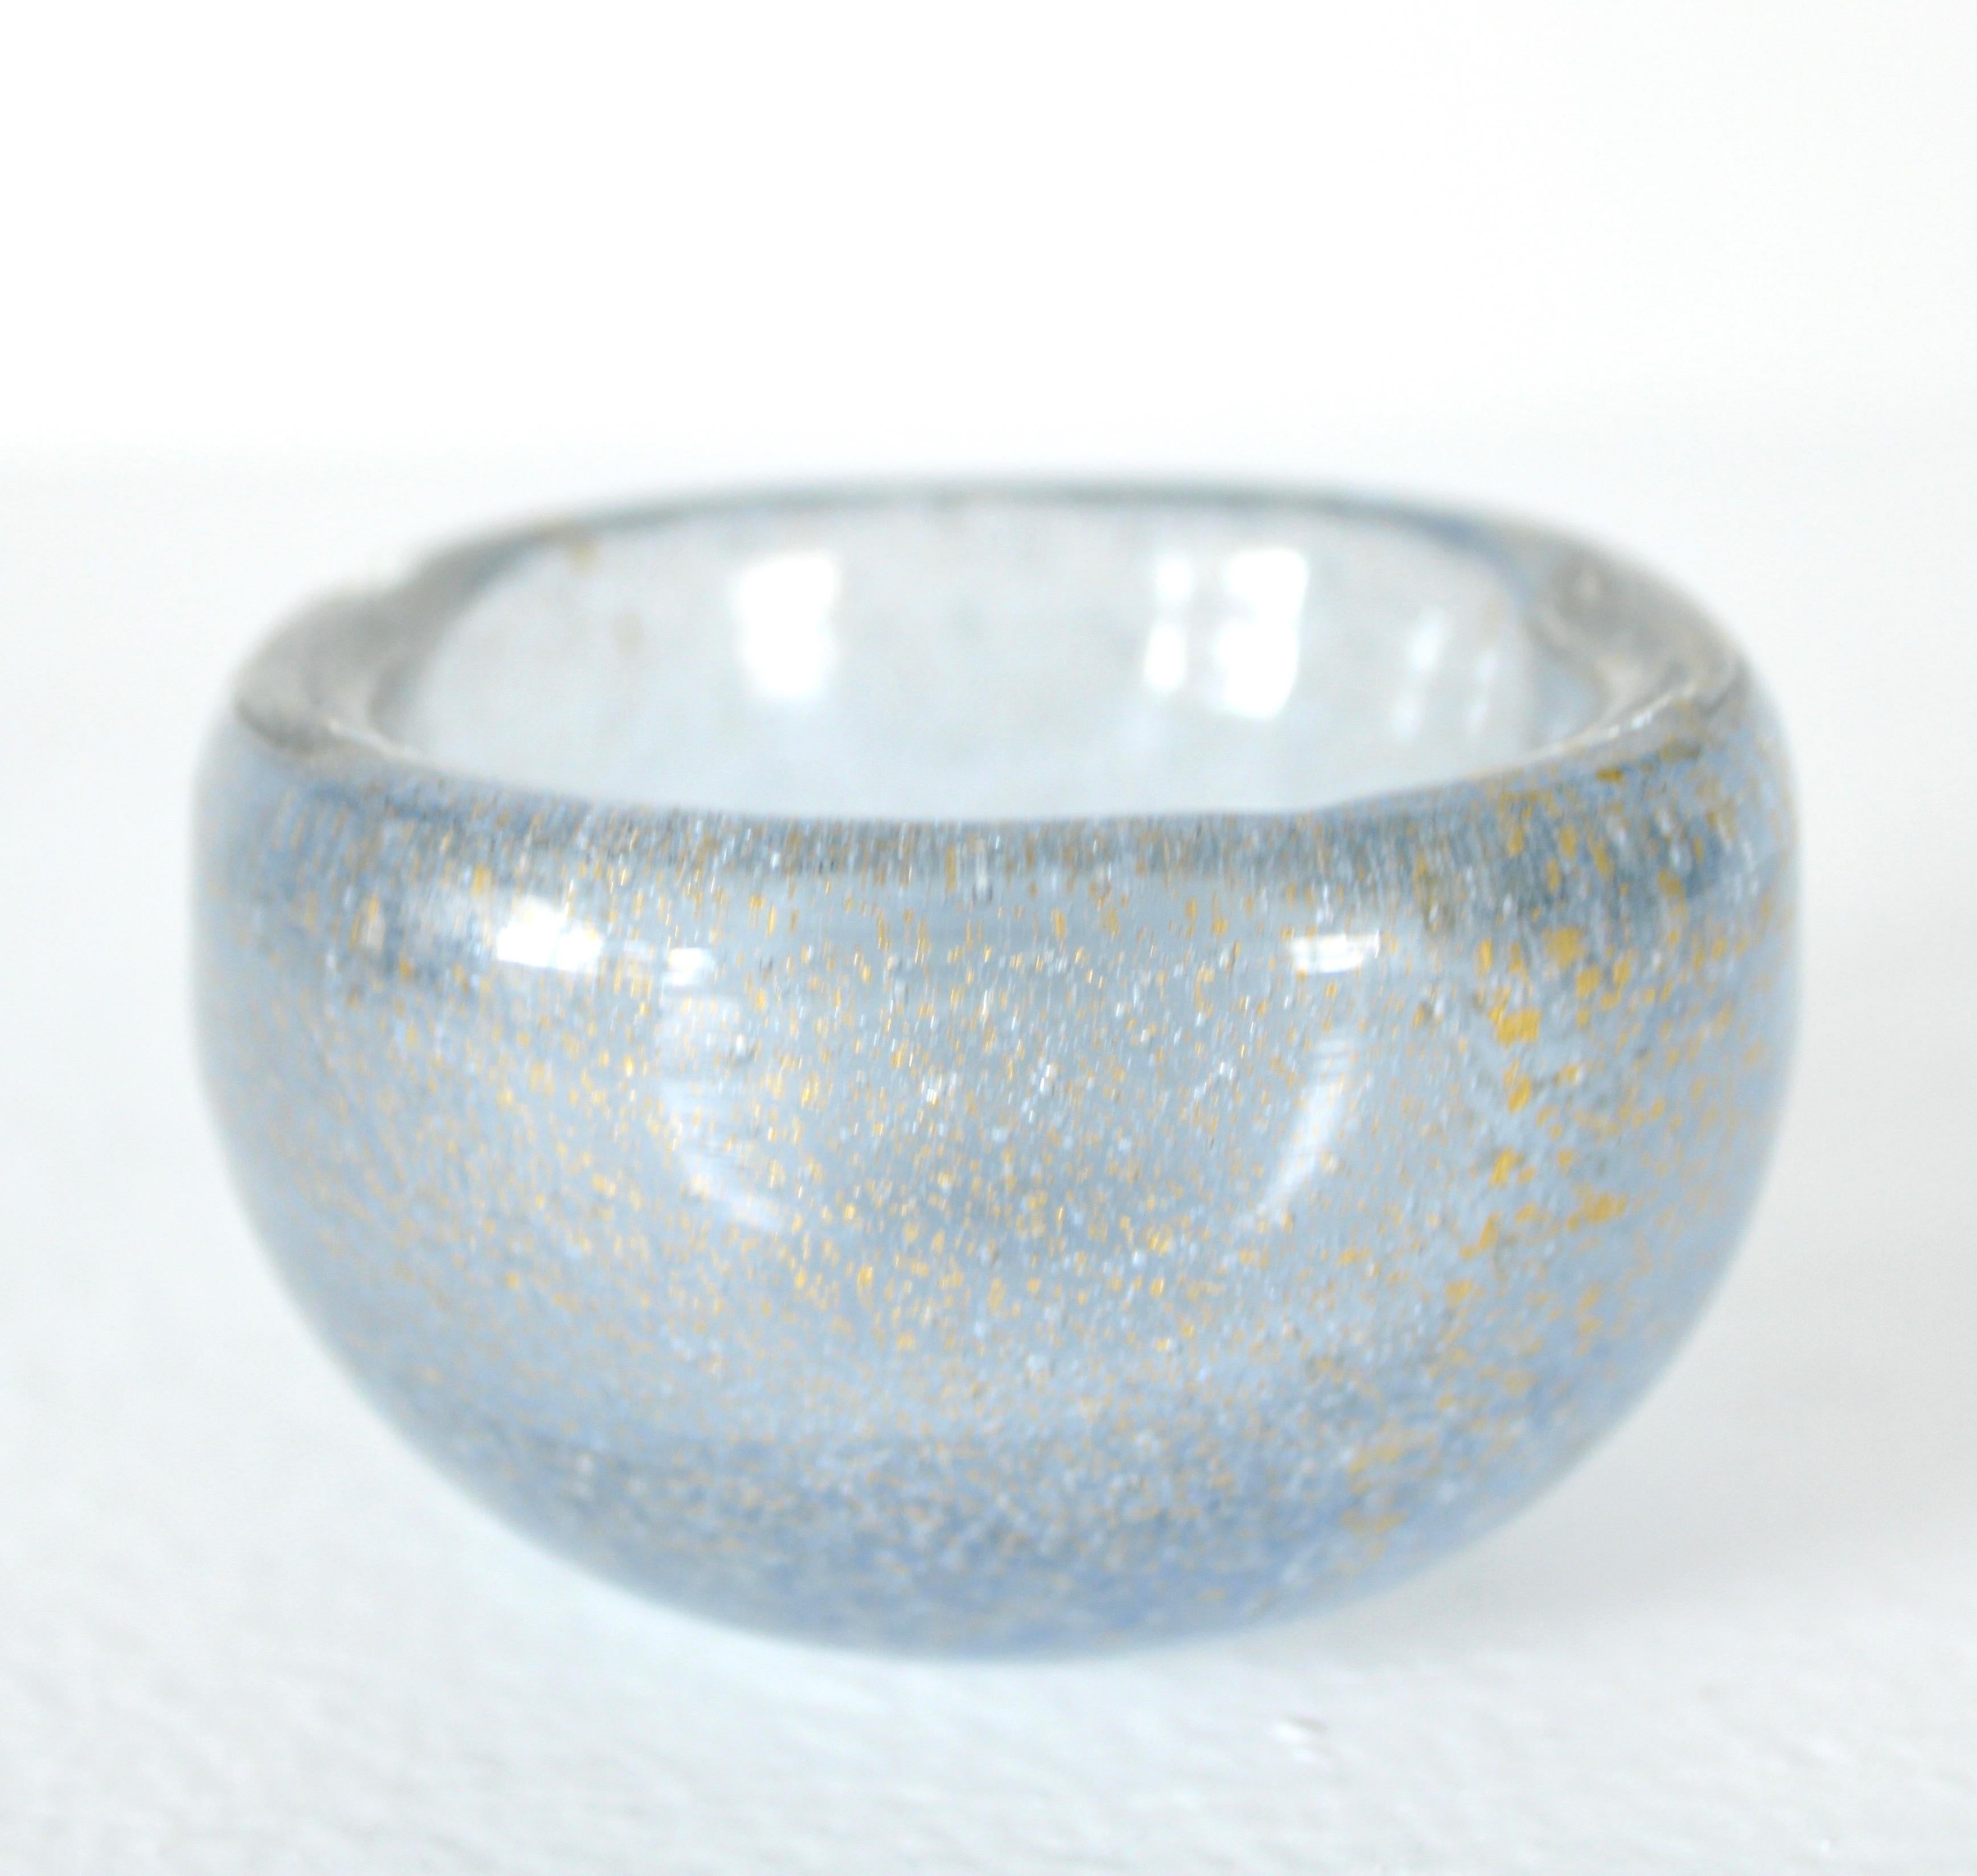 Small Carlo Scarpa bullicante Murano bowl.
The is very pale and the gold like gold stars sparkling in a sky. Unusual colors.
The Venini glass works was started in 1921 by Paolo Venini, Giacomo Cappellin, and Andrea Rioda. The company was named